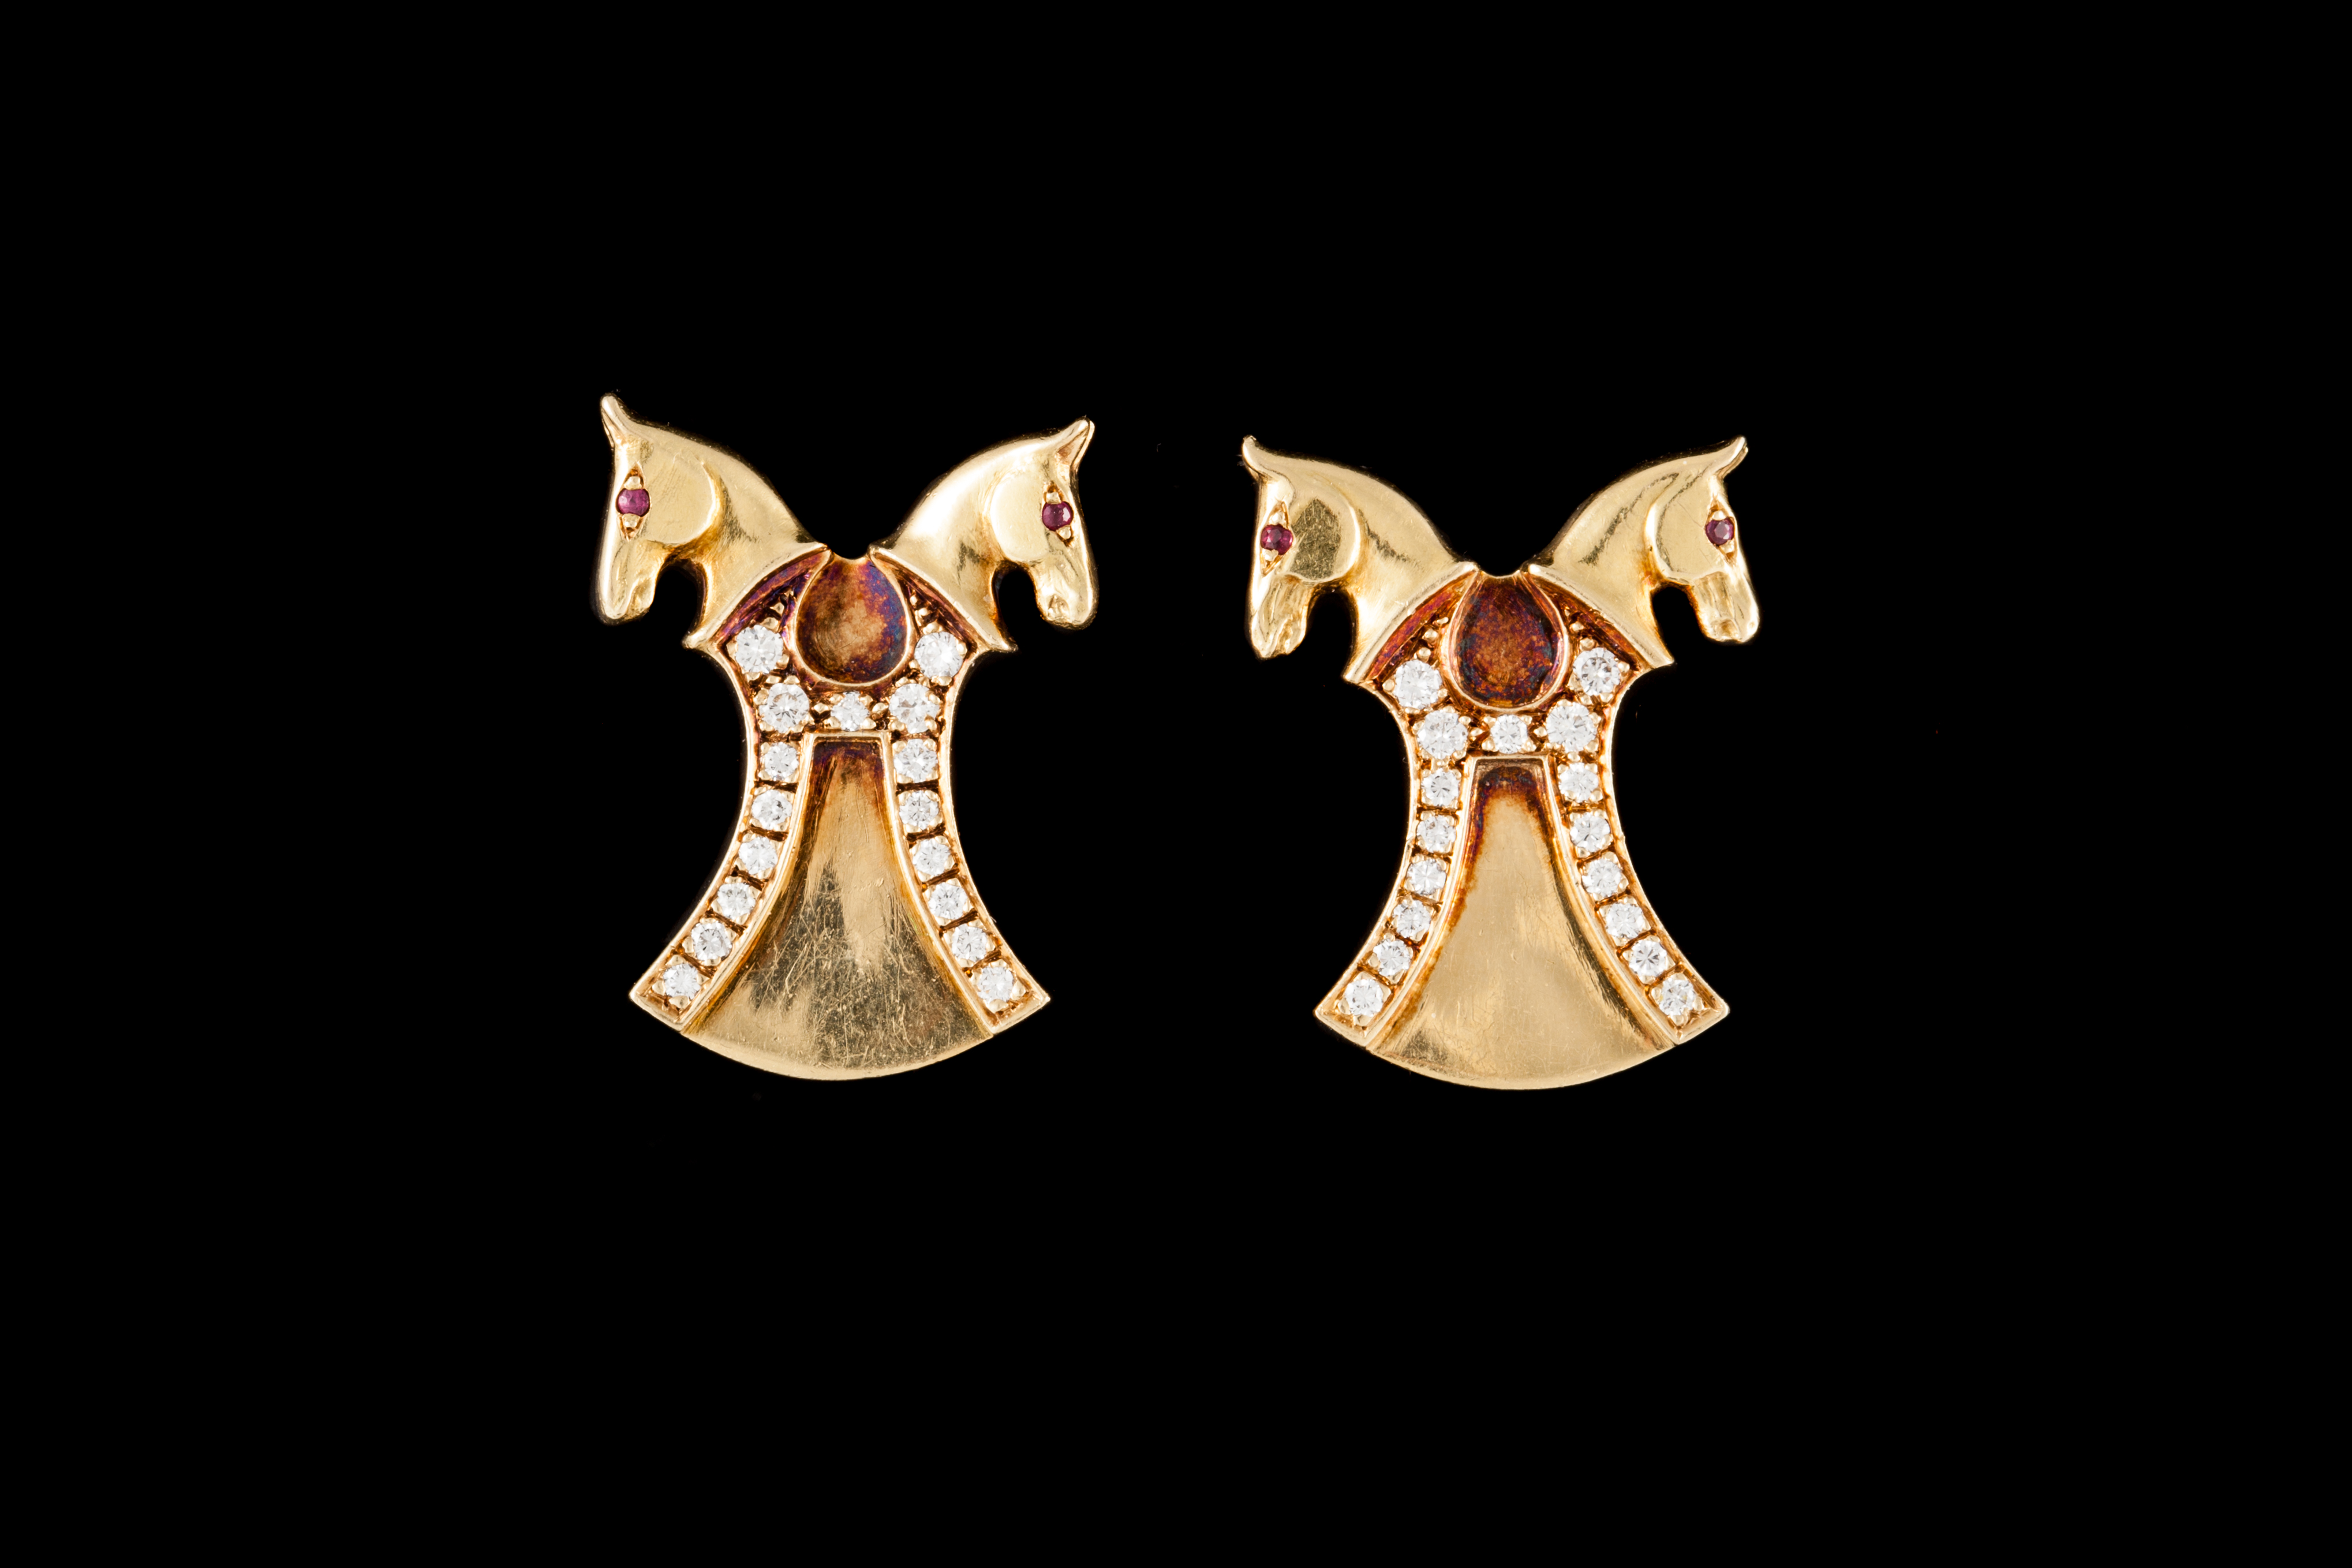 A PAIR OF DIAMOND SET EARRINGS, depicting horses, mounted on 18ct gold